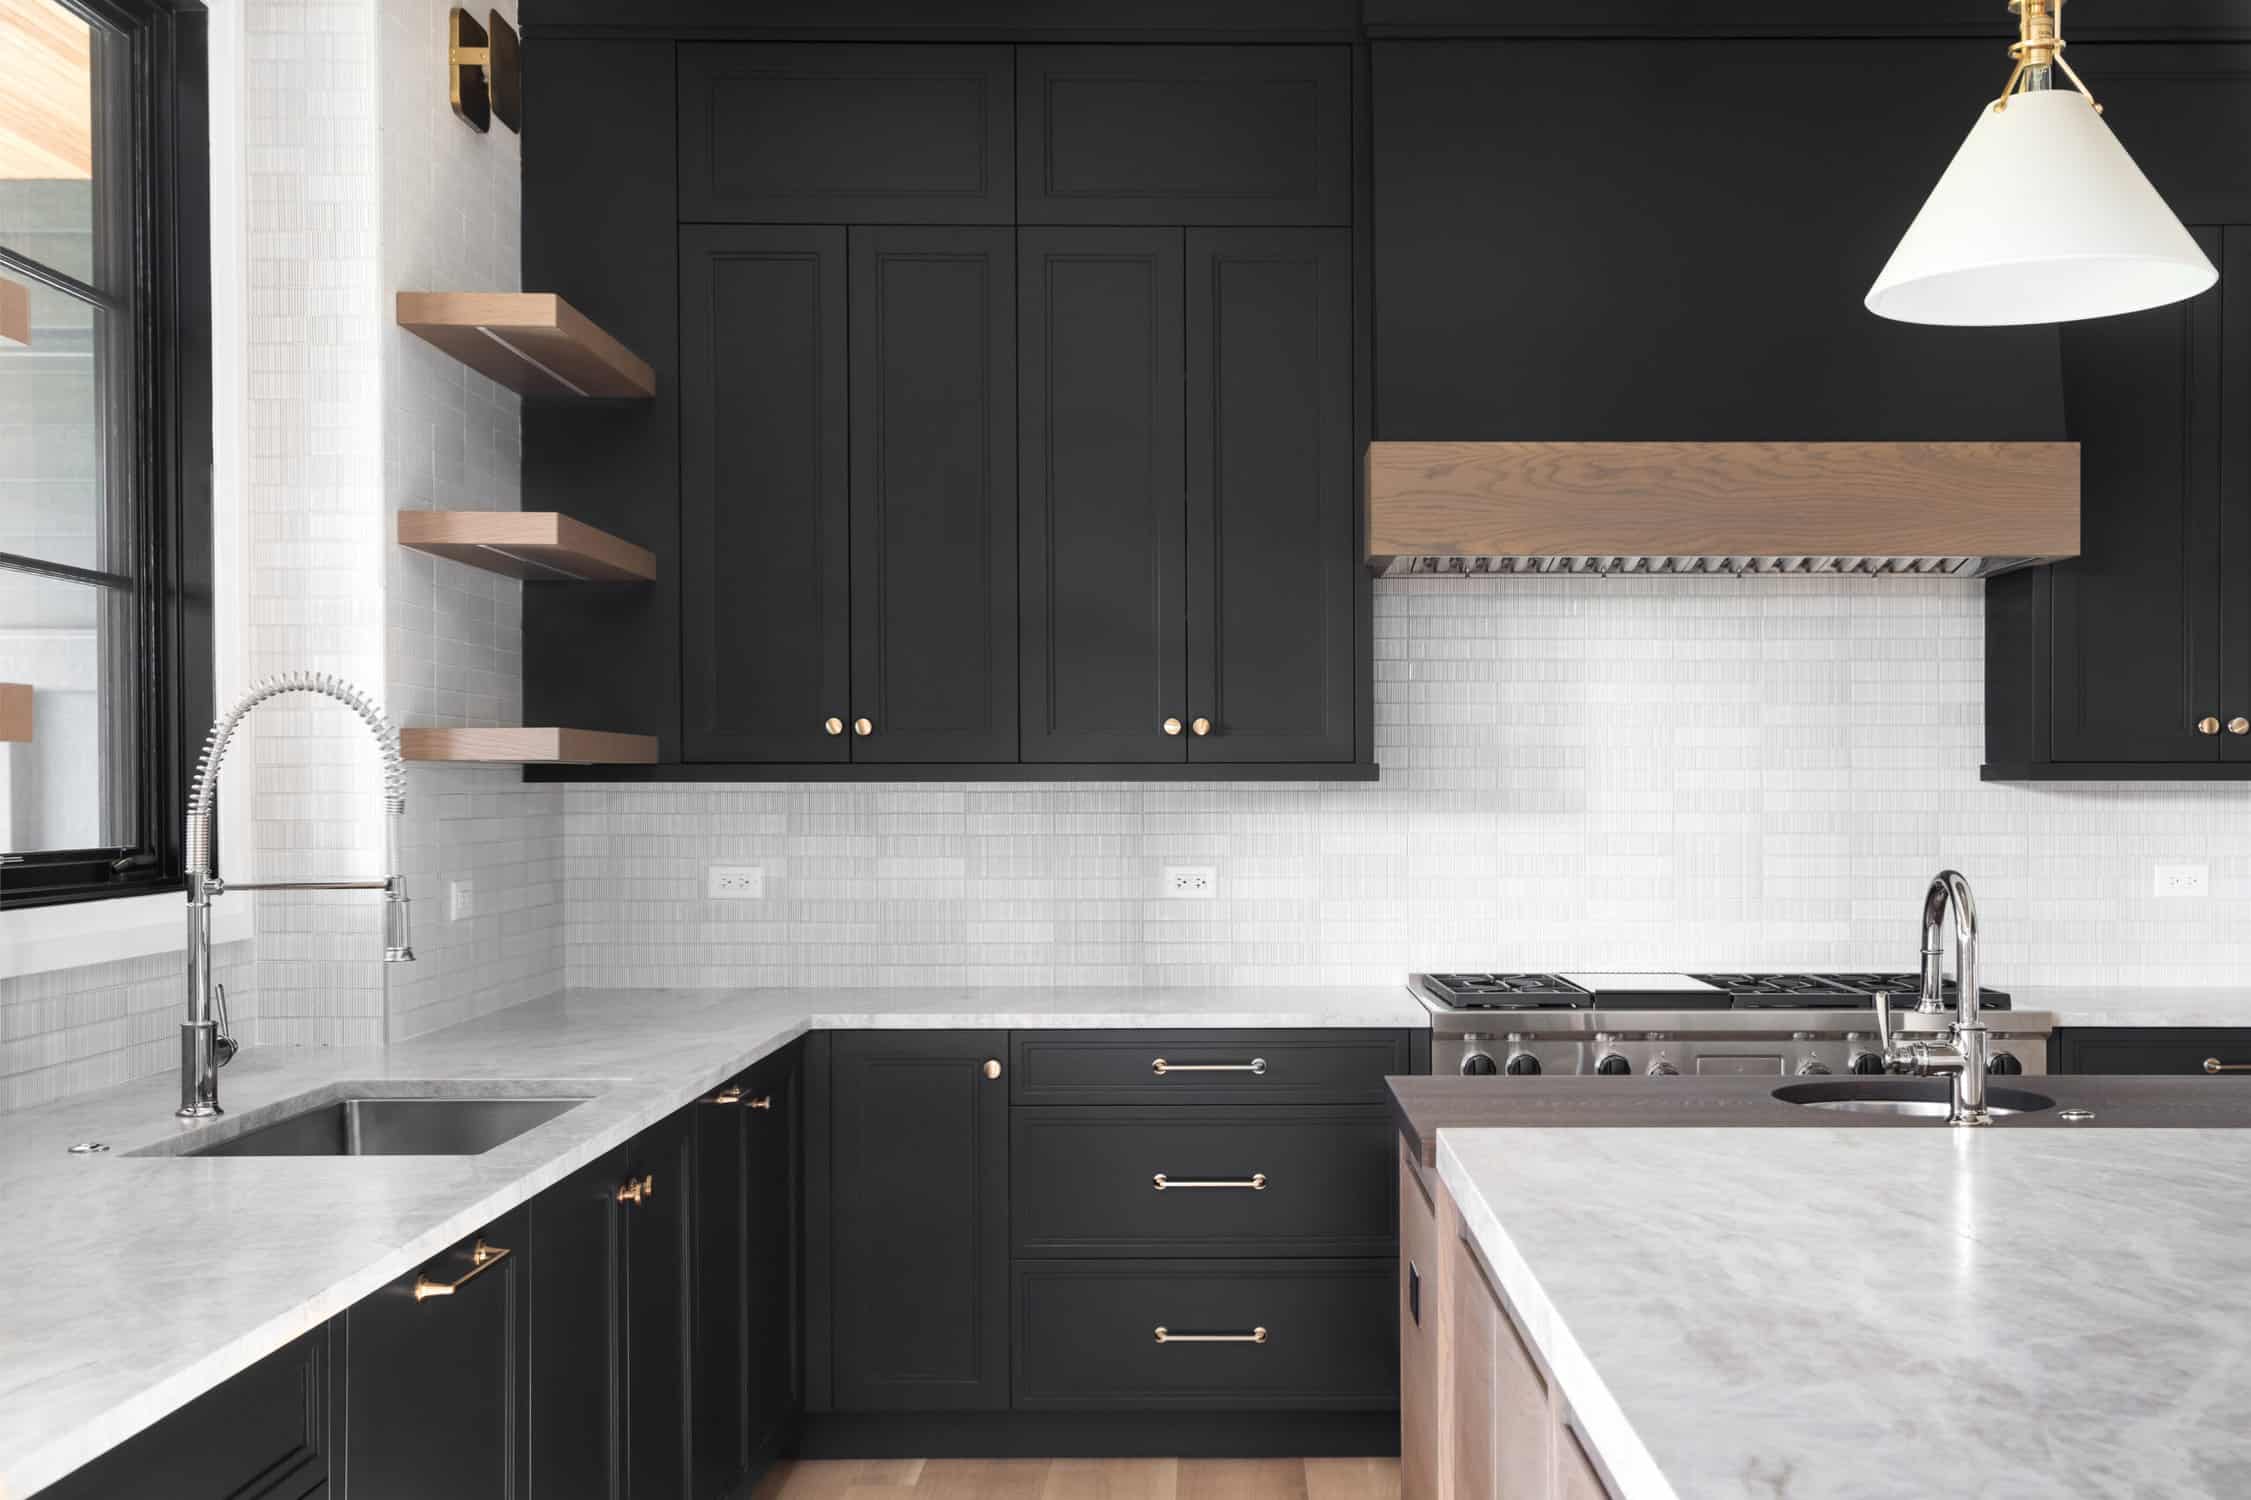 A black kitchen with stainless steel appliances. painting storage cabinet